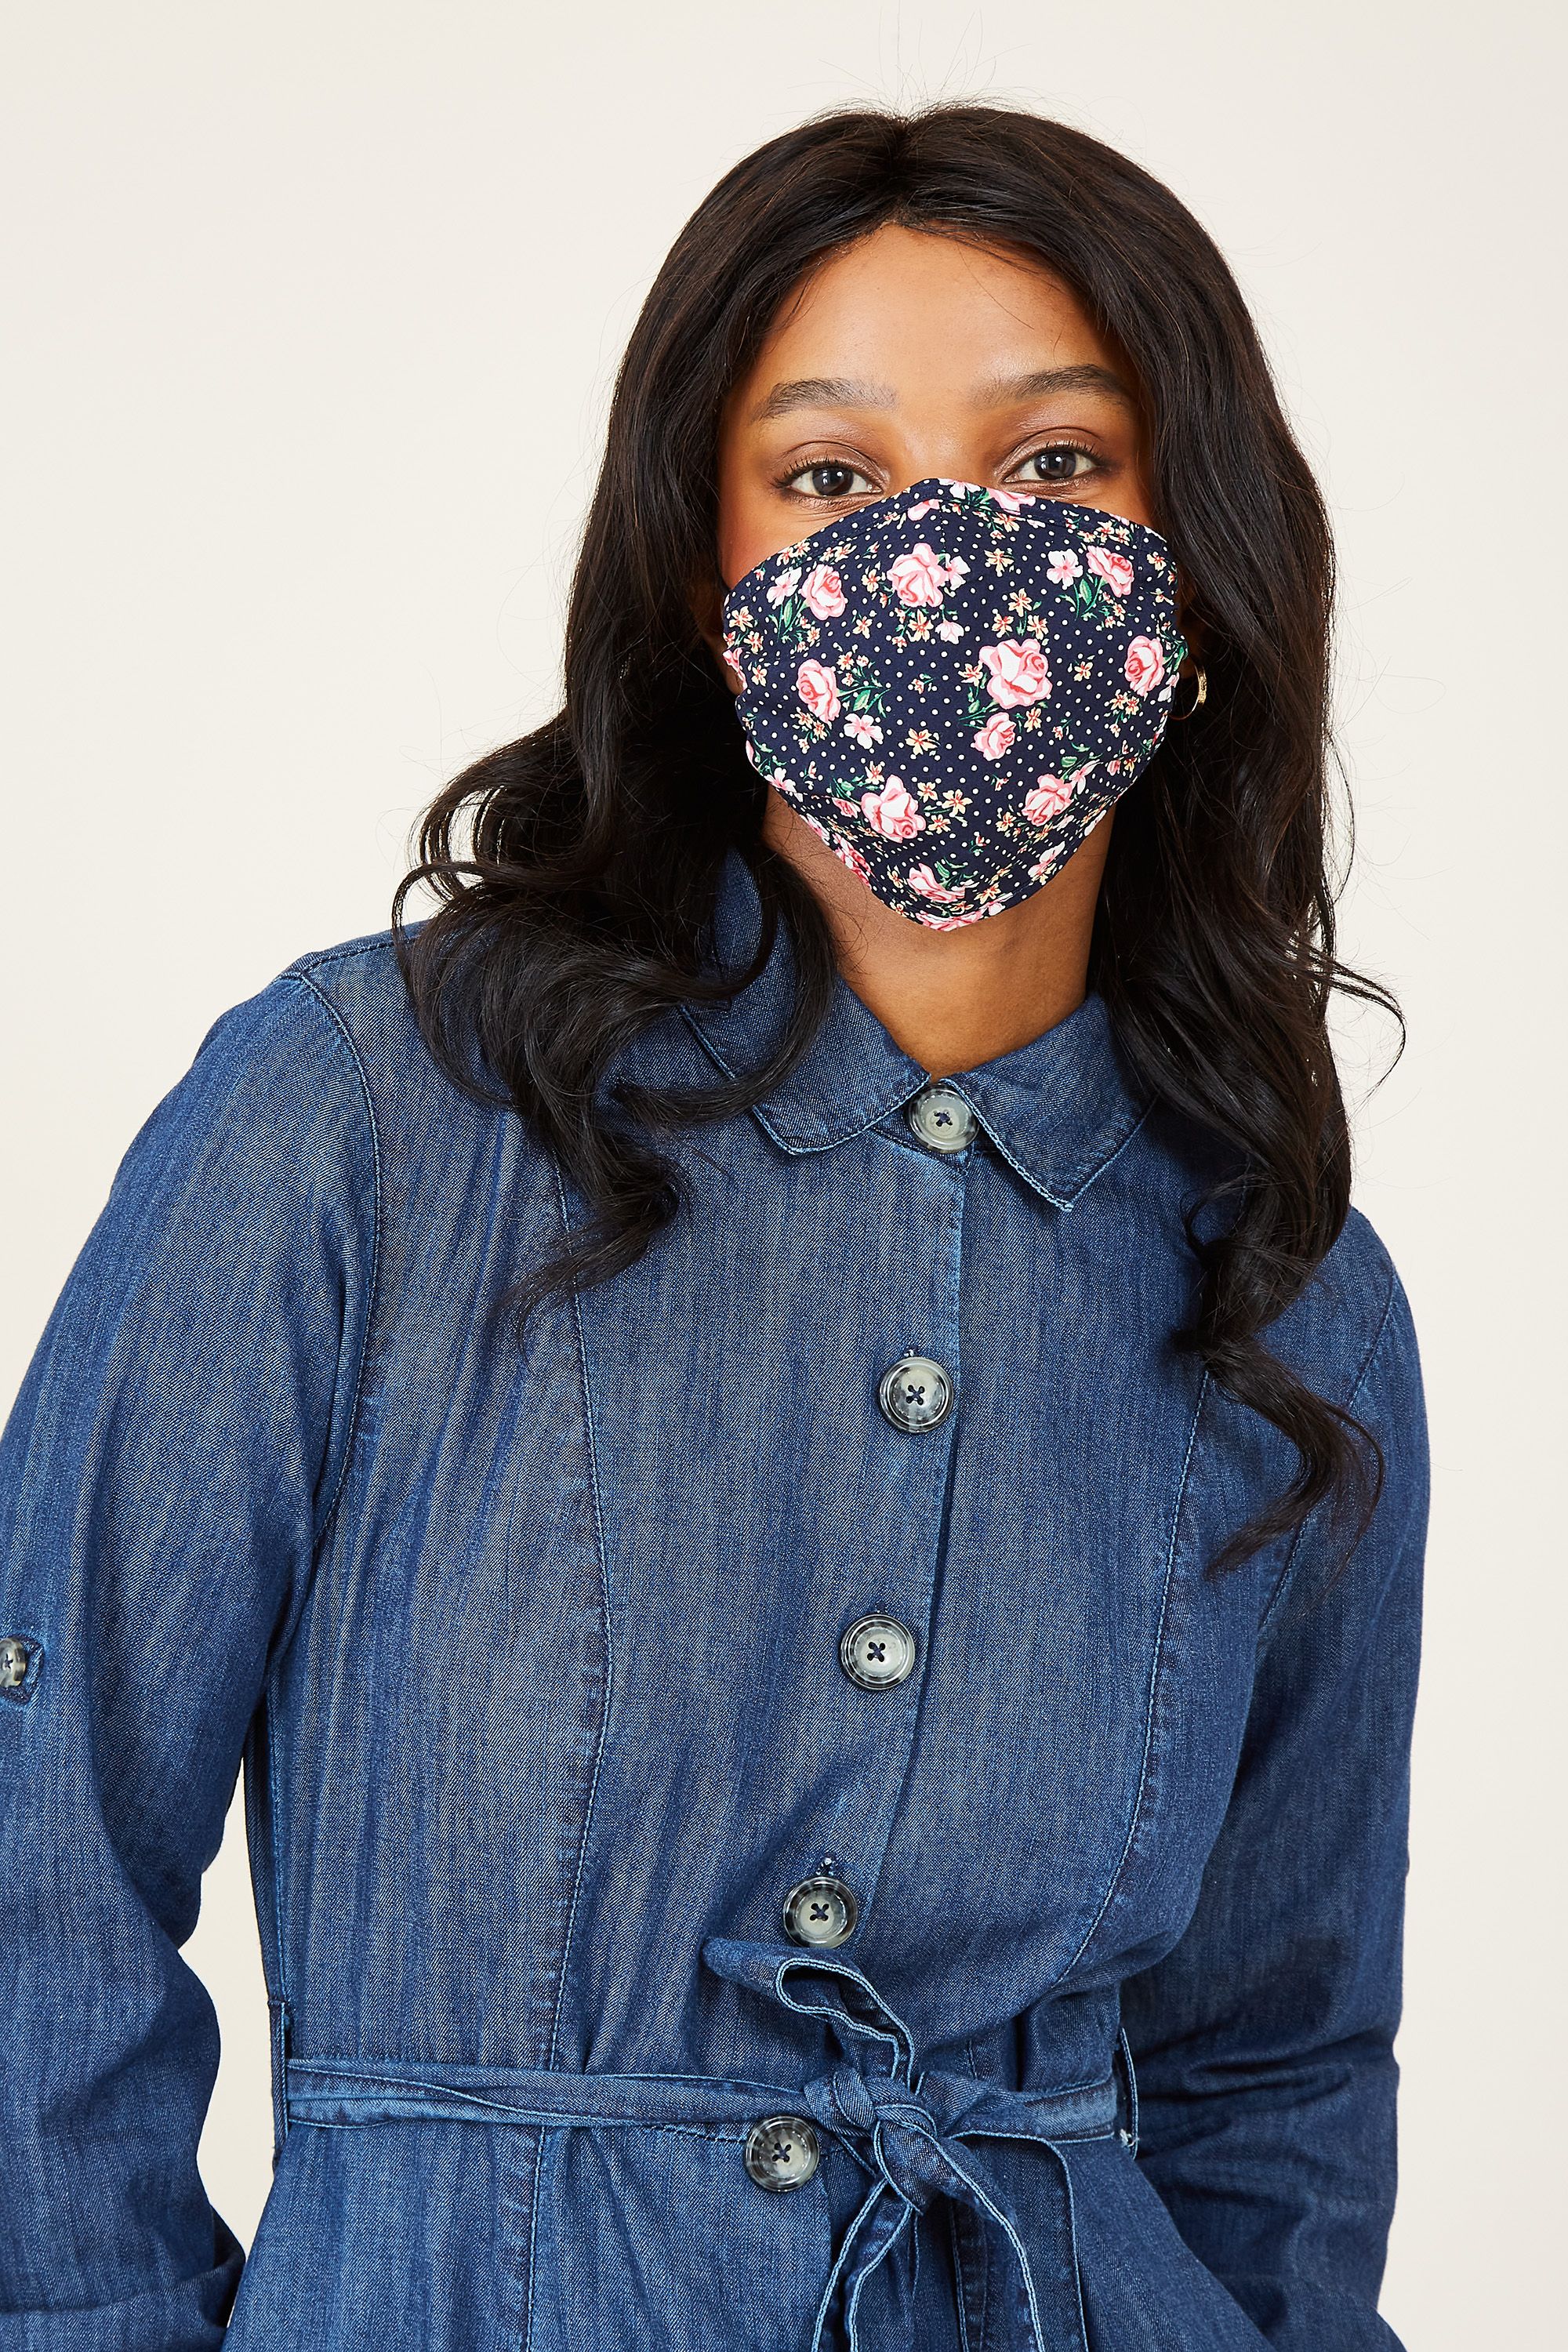 Expertly cut from super-soft cotton, our Retro Floral Face Coverings 3 Pack are perfect for showing off your style and keeping comfortable. Sourced from the ends of our fabric rolls, they are a sustainable choice and kind to the planet. Please remember these are non-medical masks and not PPE. Wash your hands before and after putting on the covering. One Poundfrom each covering is donated to Sufra, a charity that supports and provides food for people in extreme poverty.